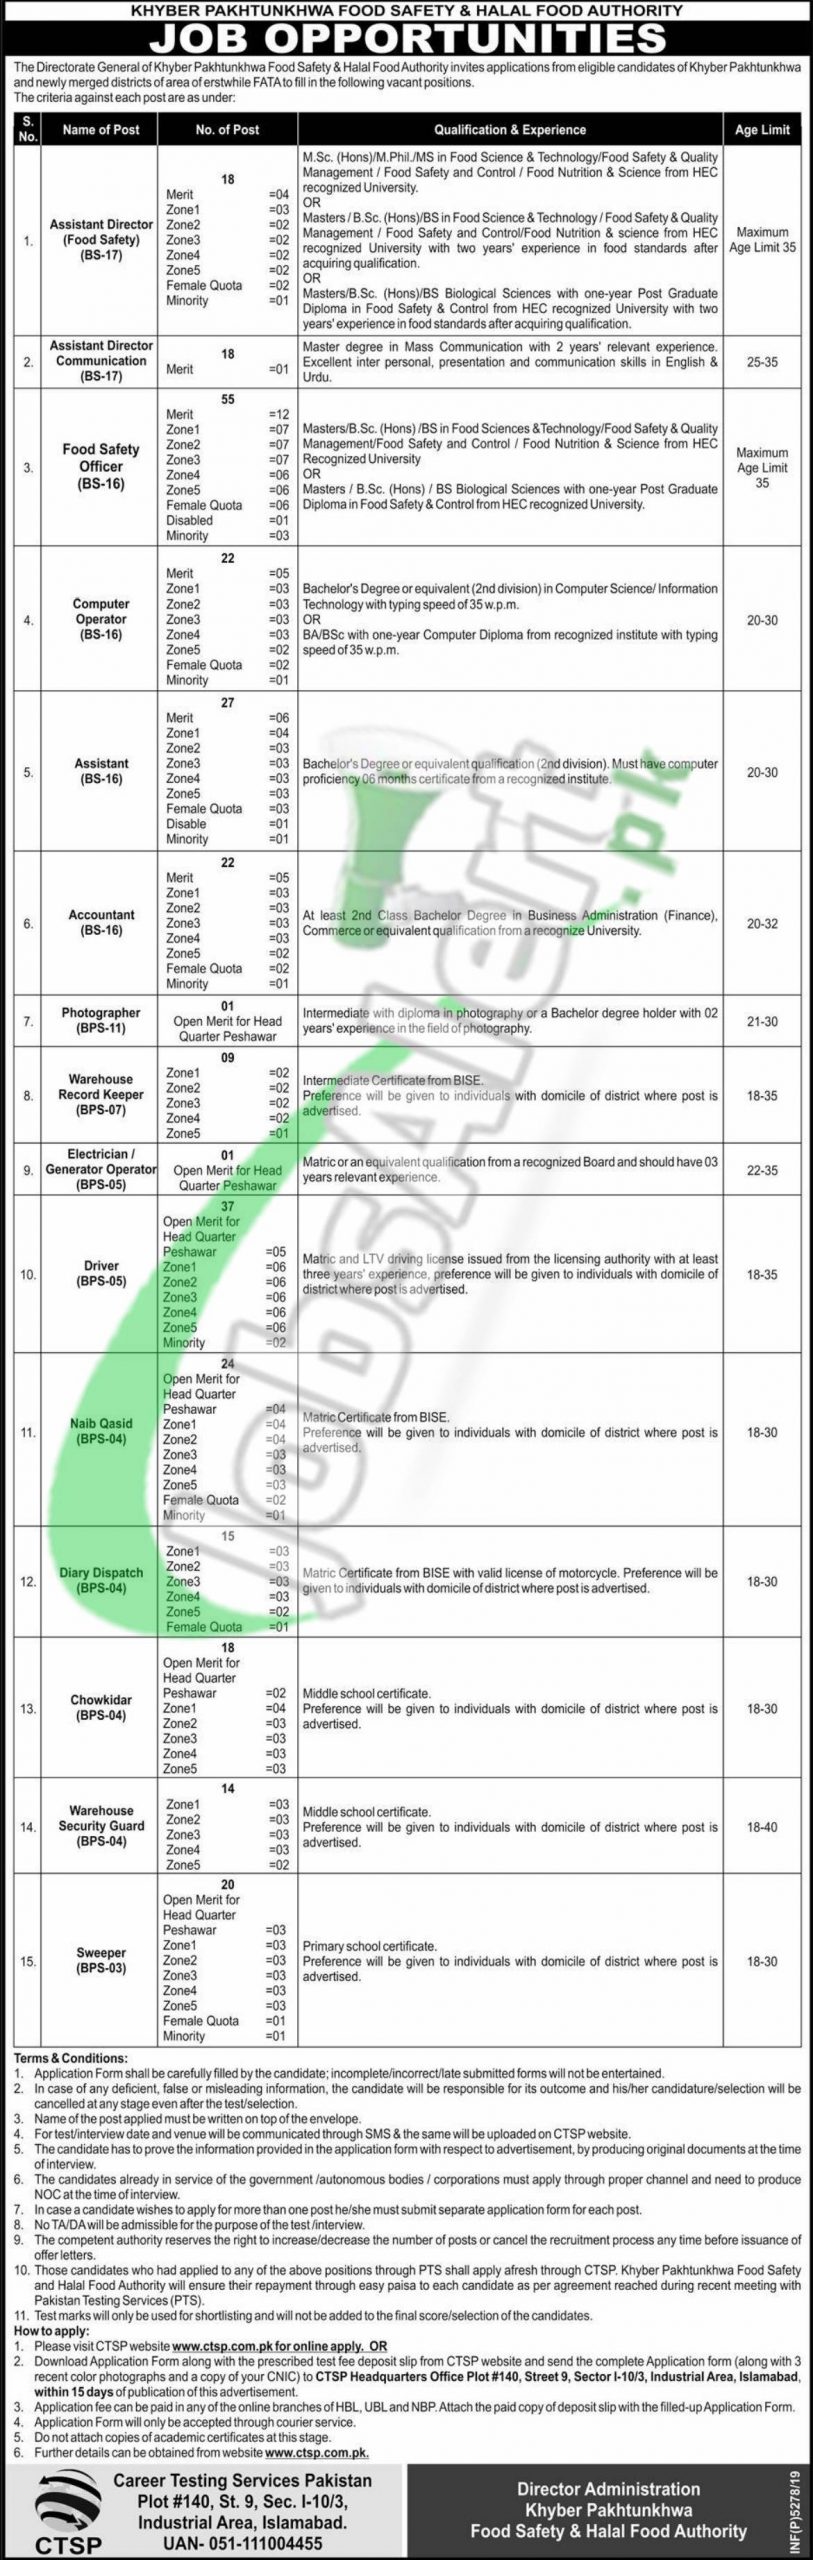 Khyber Pakhtunkhwa Food Safety & Halal Food Authority Job Opportunities